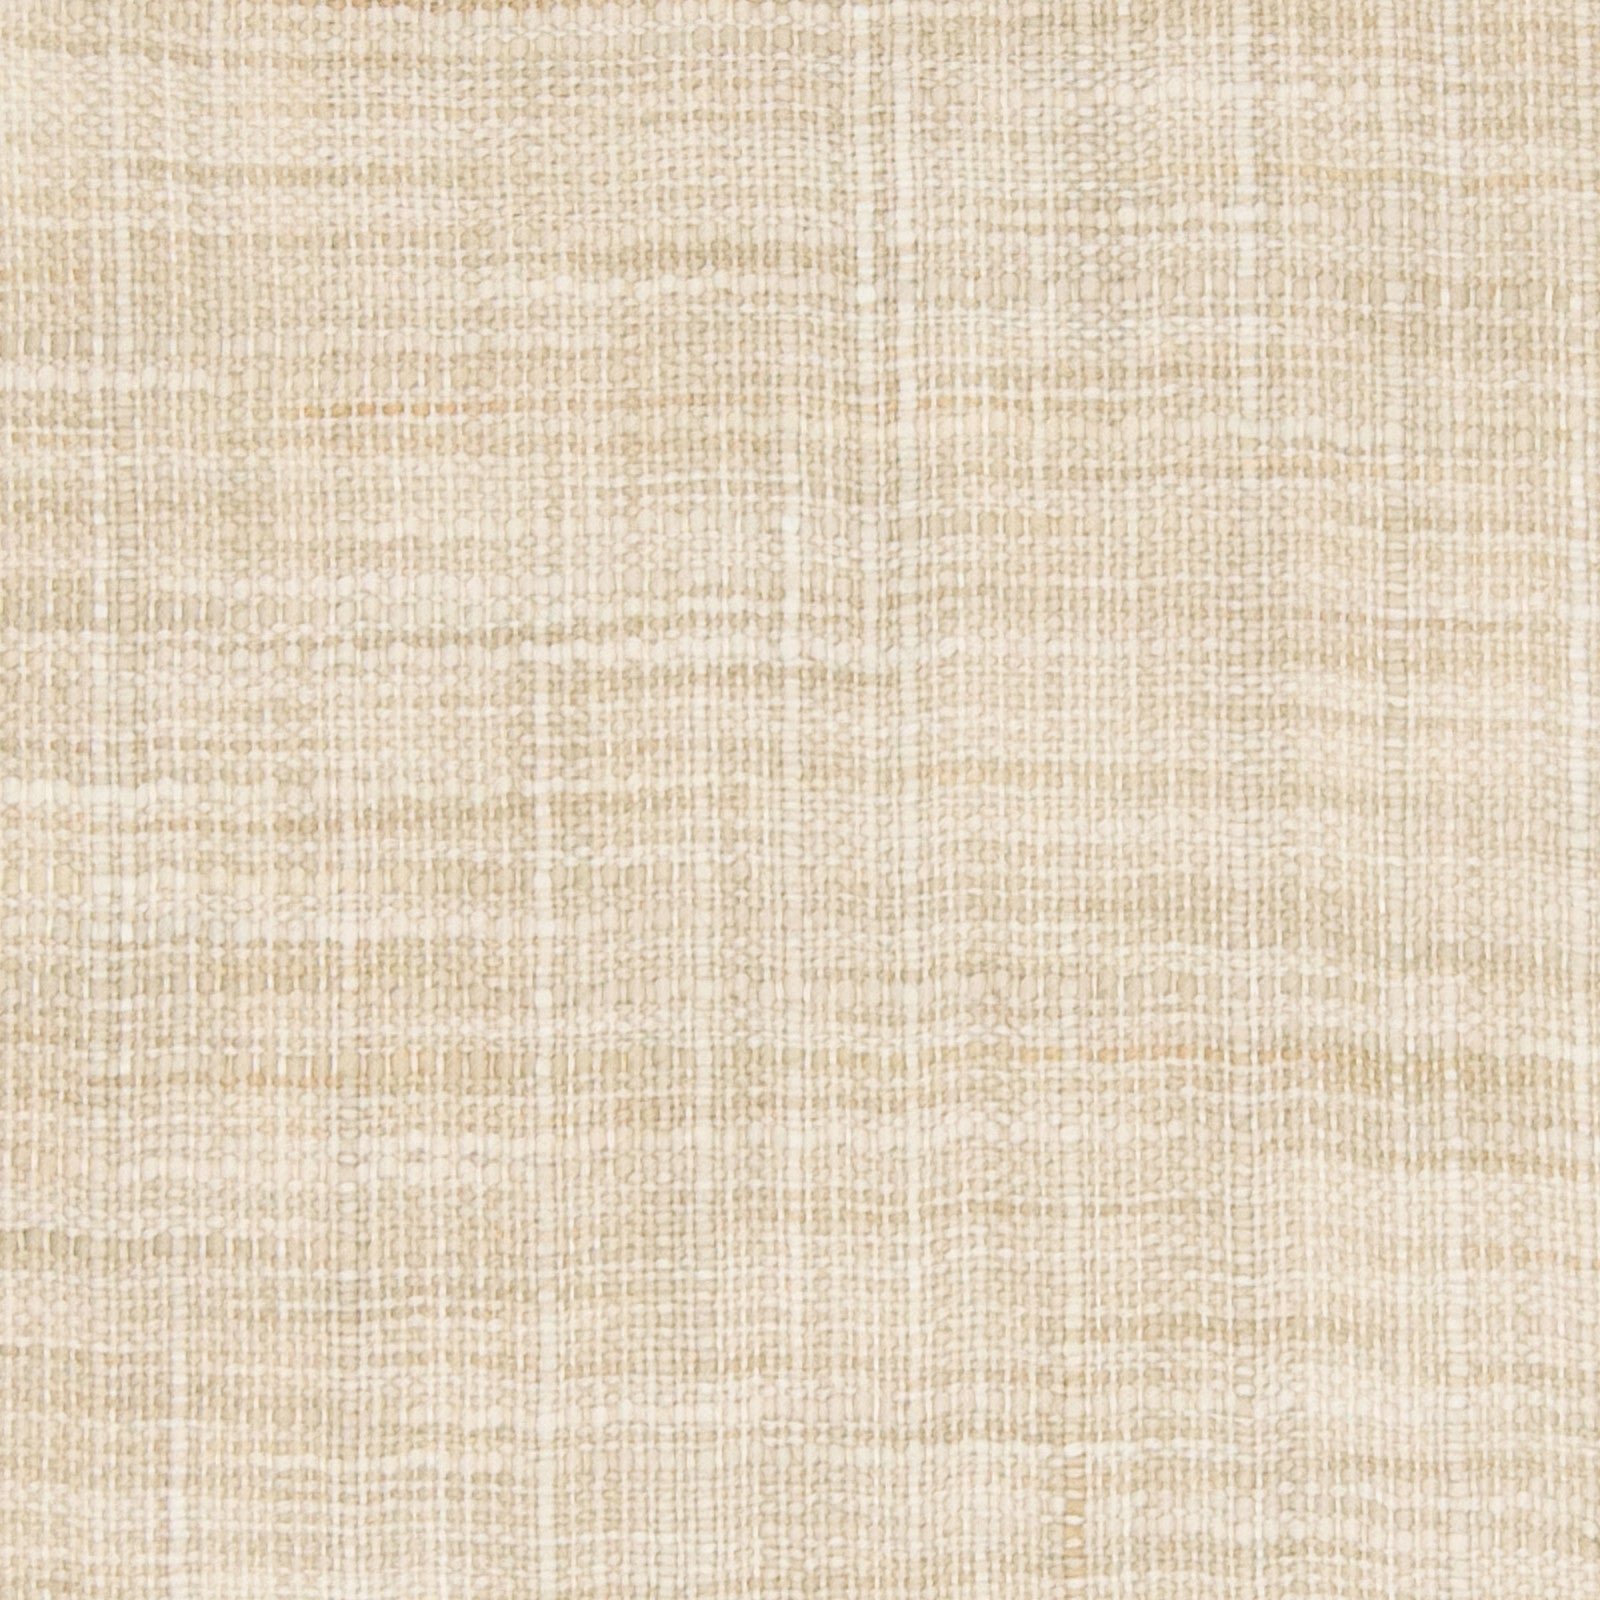 Purchase Greenhouse Fabric A2550 Sand